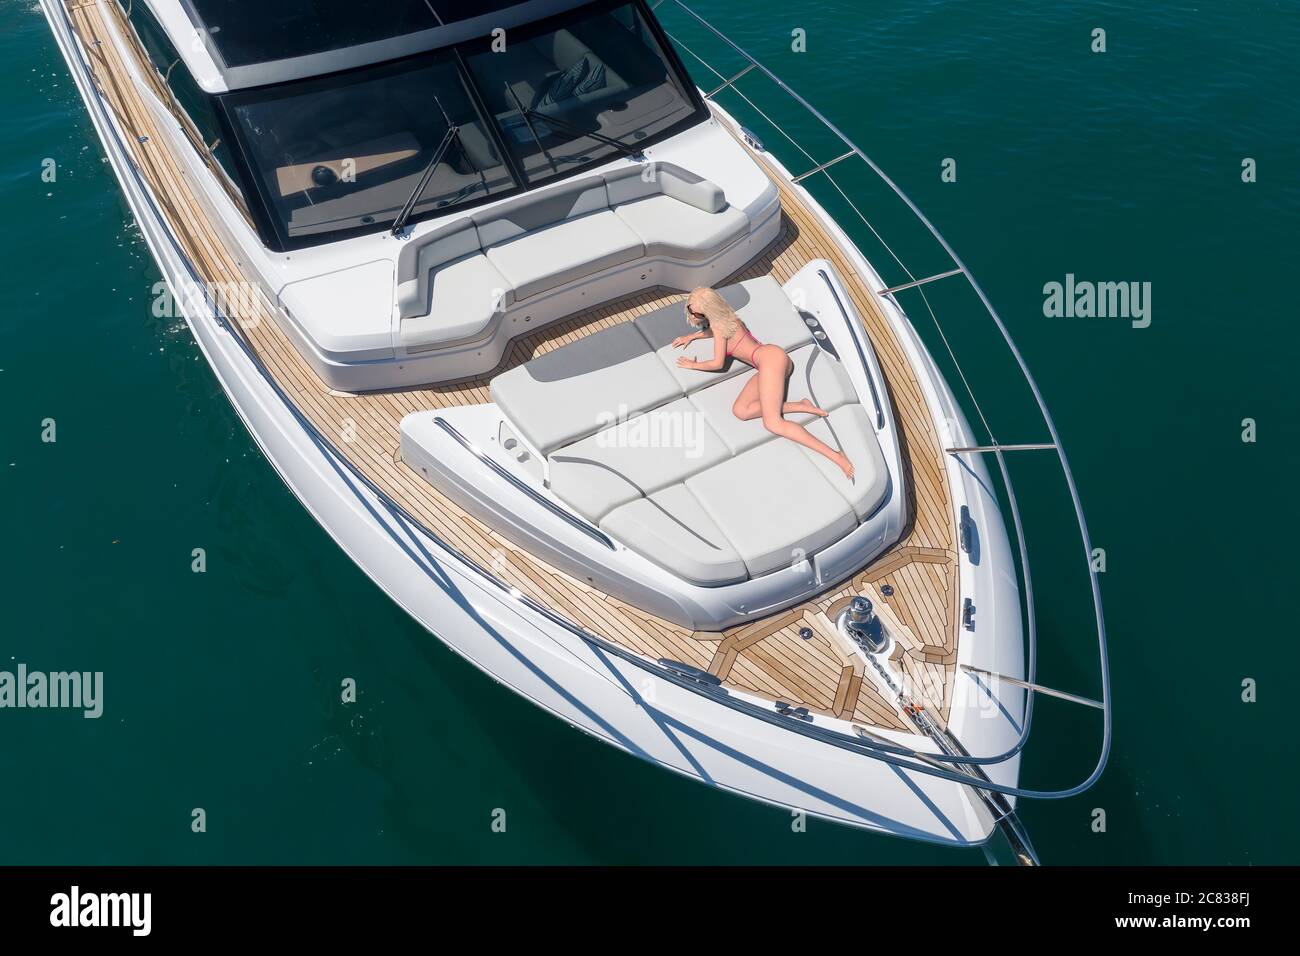 A young woman (18 - 30) in a bikini reclined on the foredeck of a 20M motor yacht. Stock Photo